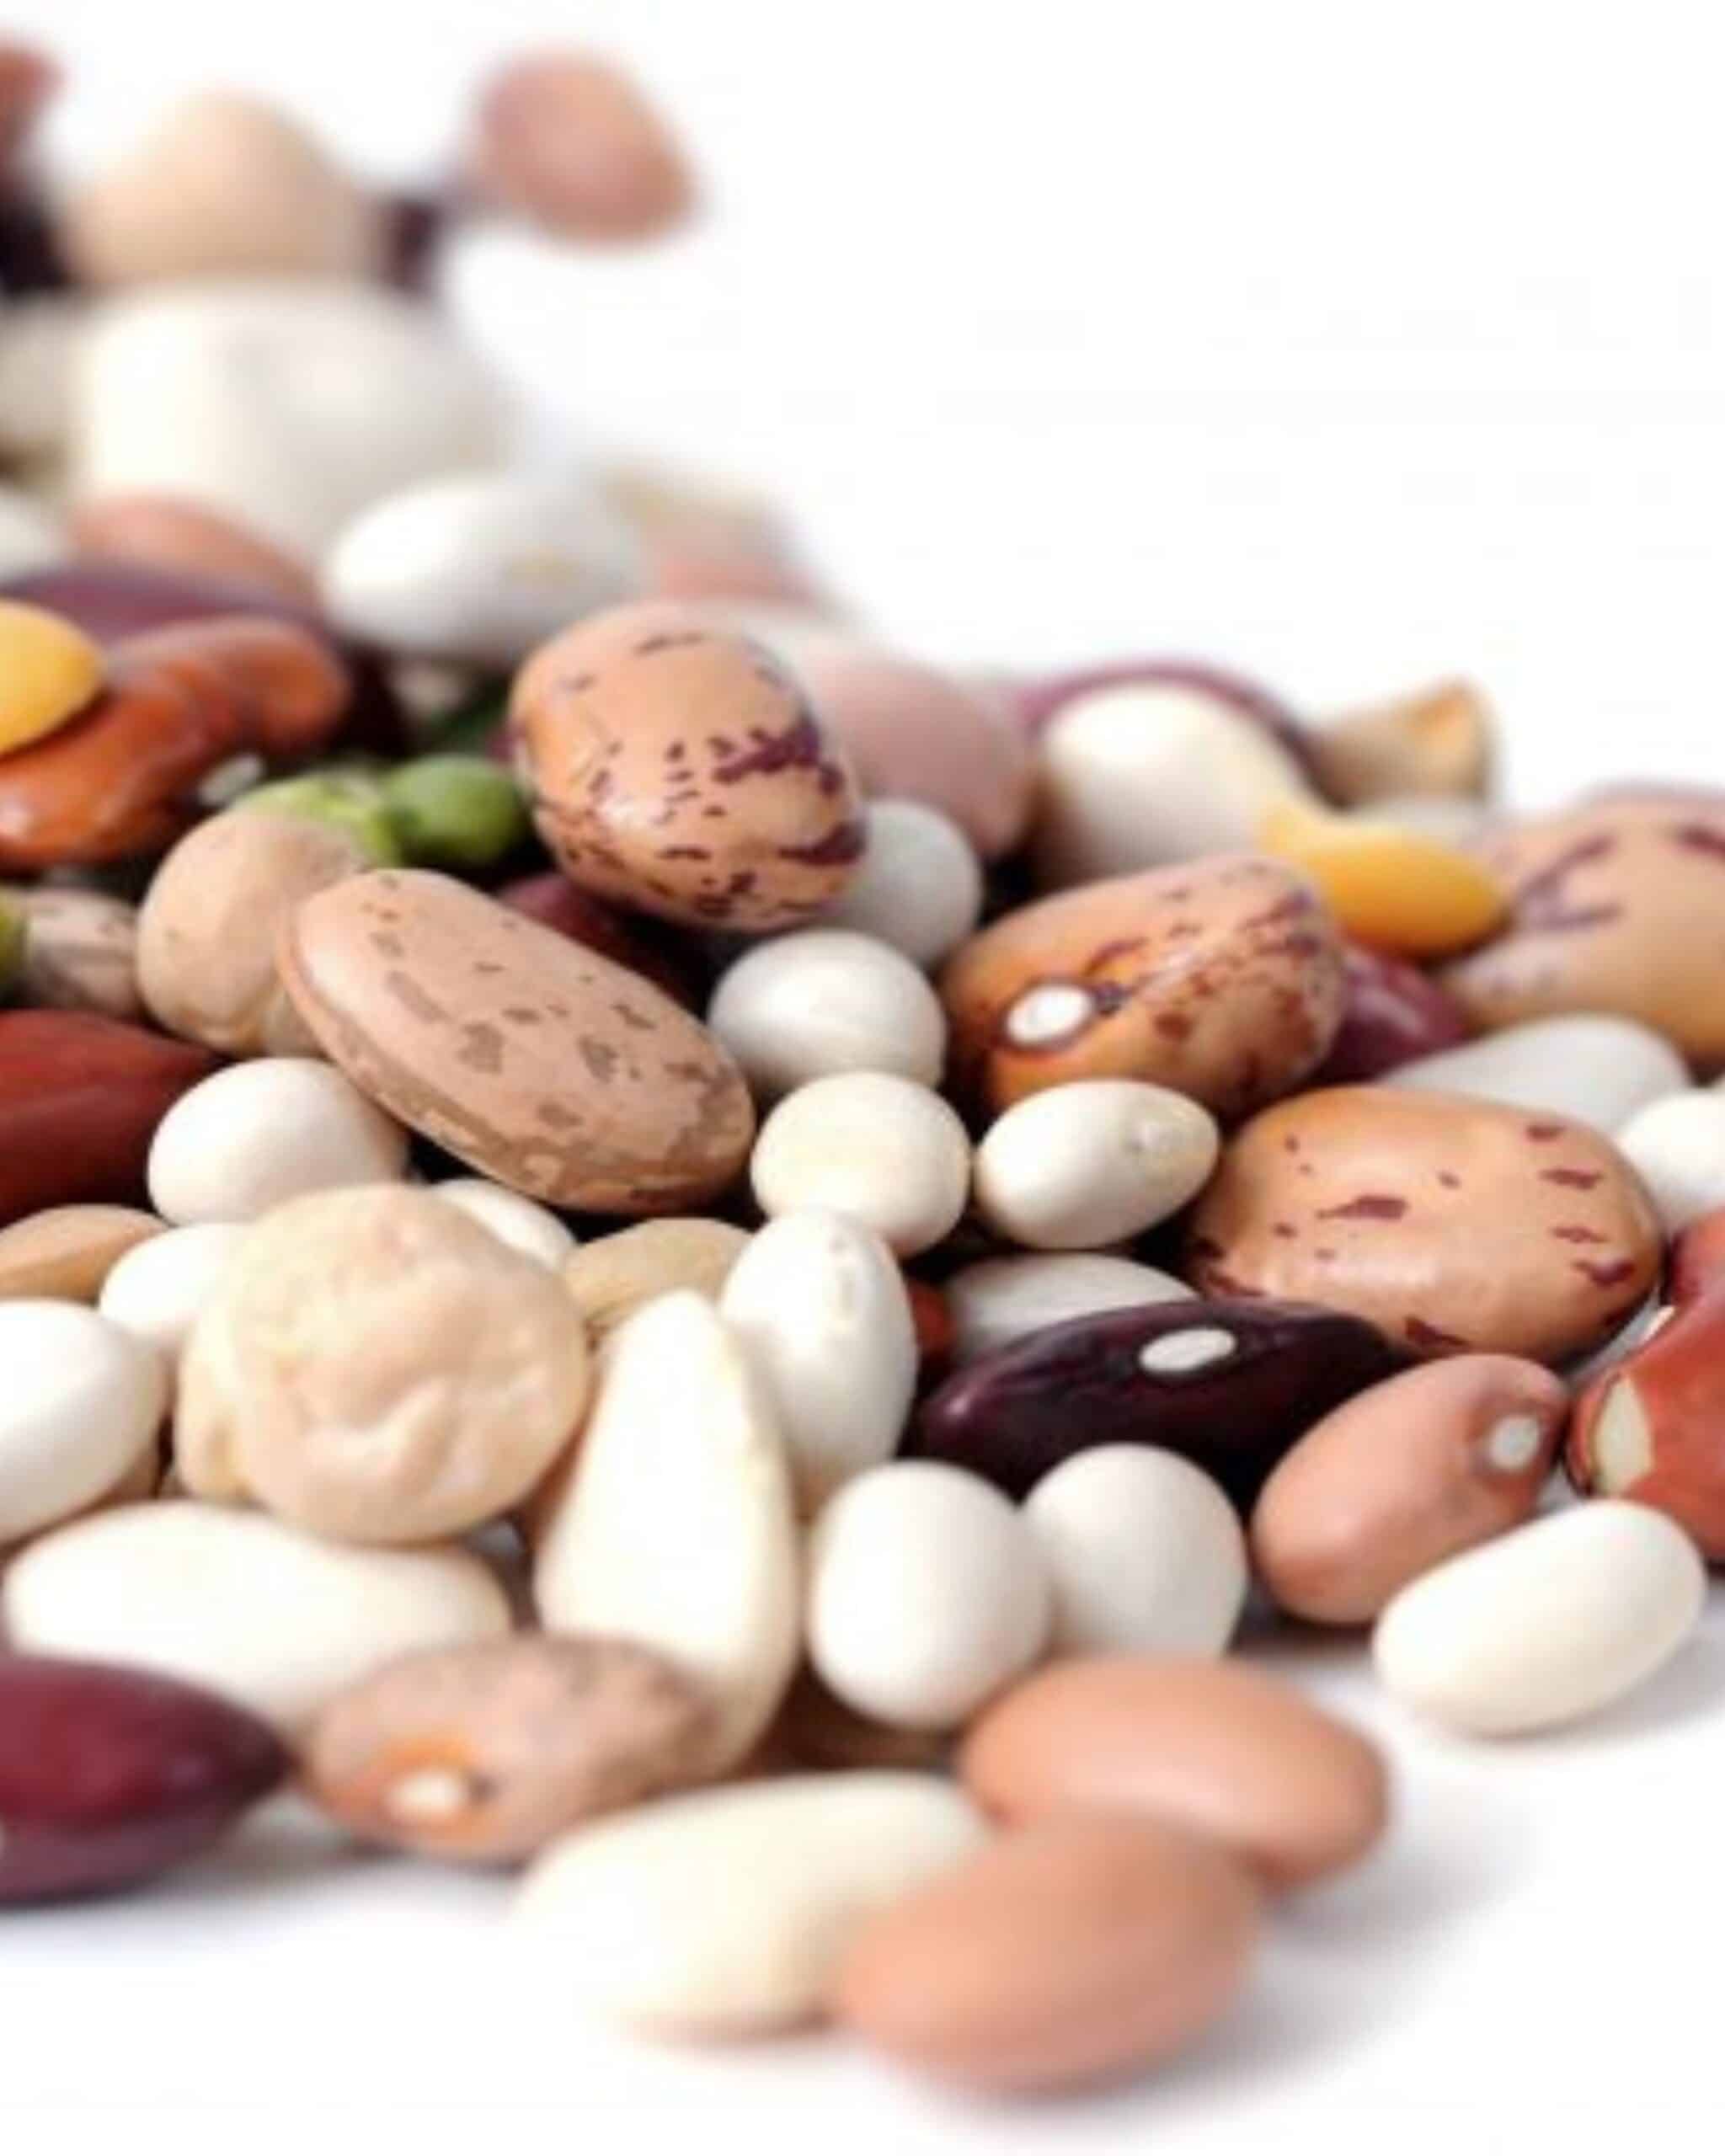 Legume Allergy: All The Details (Beans, Lentils, Peas, and More